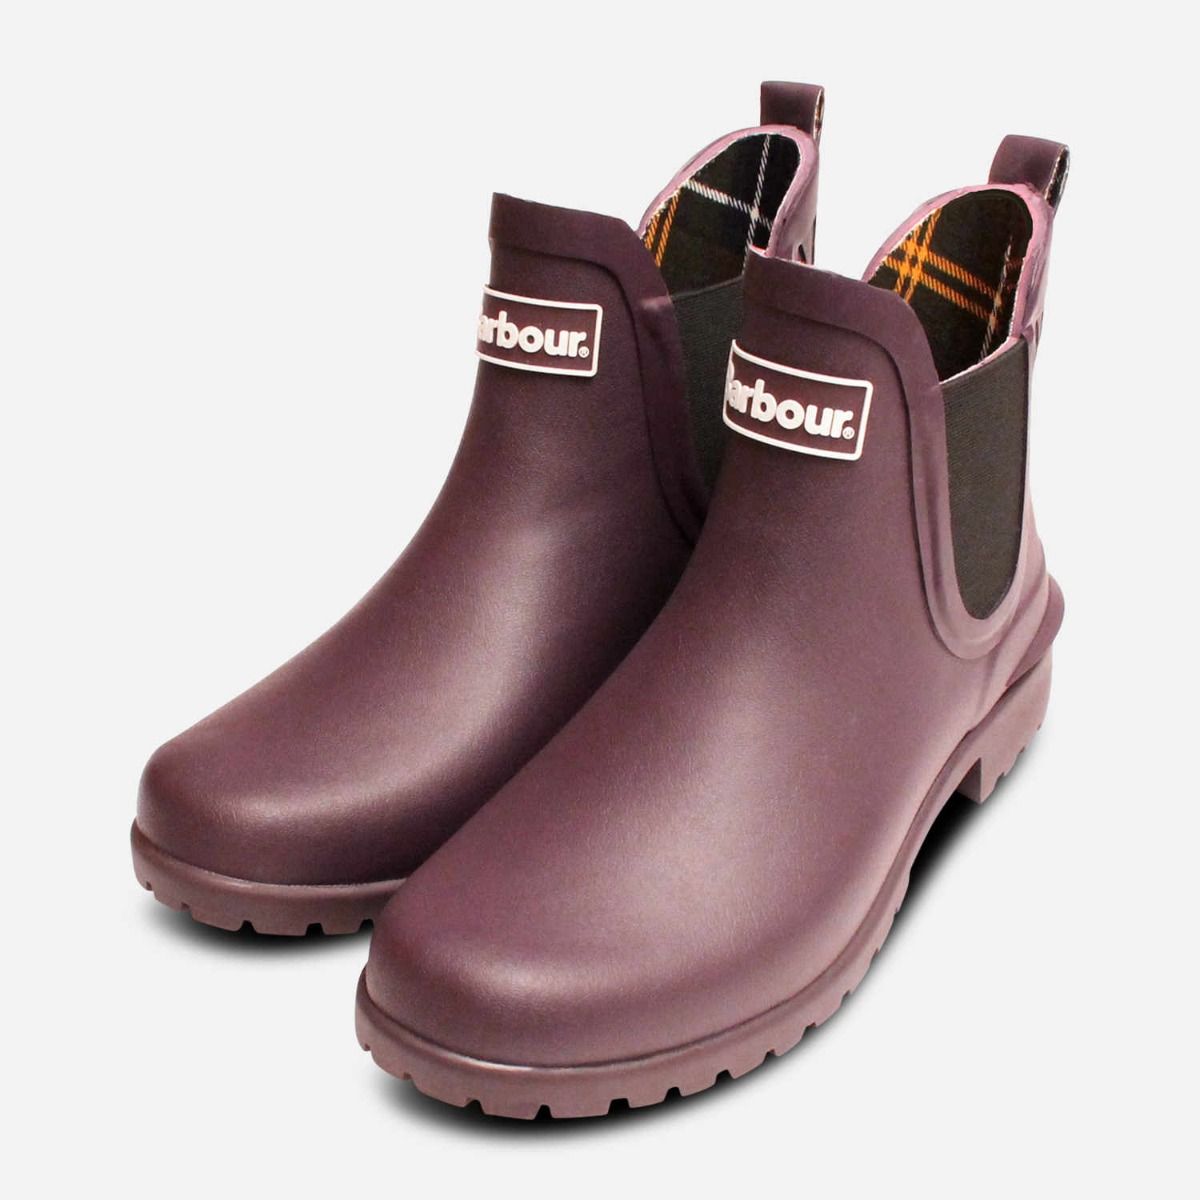 mens barbour ankle wellies